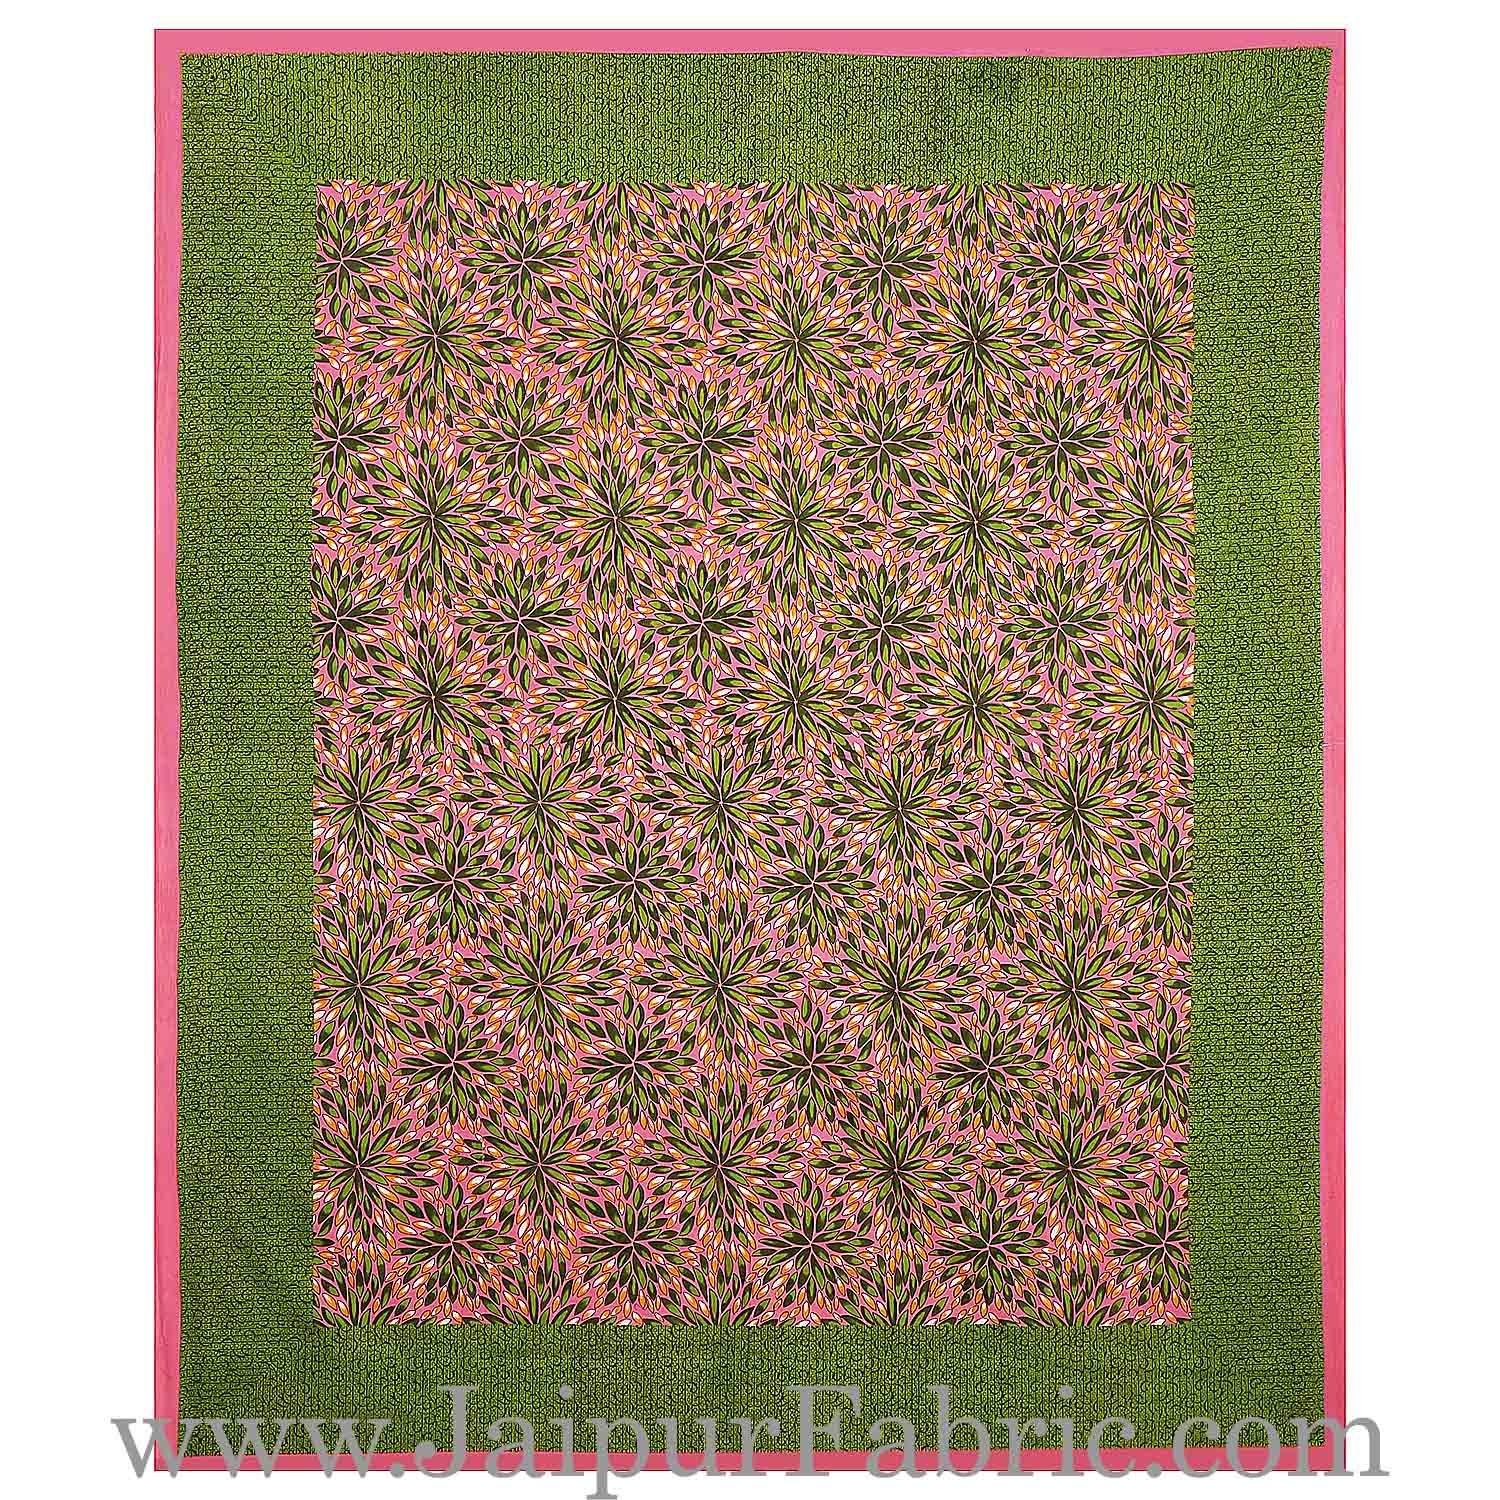 Pink Border Green Base Flower Pattern Cotton Double Bed Sheet